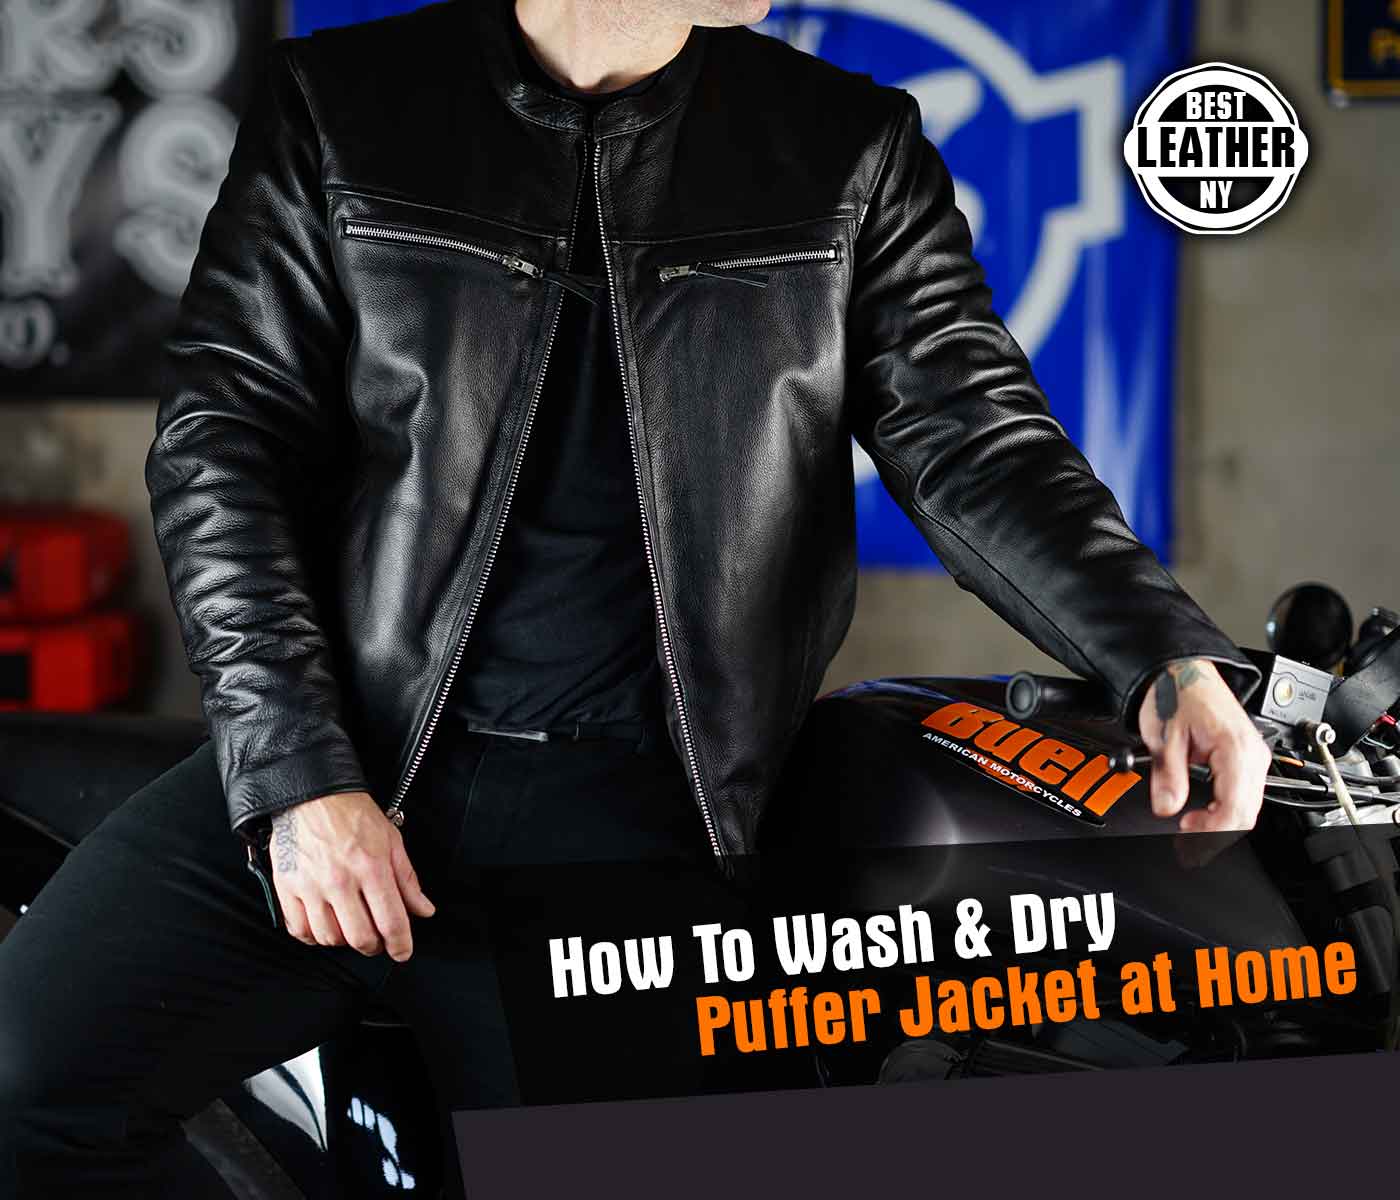 How To Wash & Dry Puffer Jacket At Home?